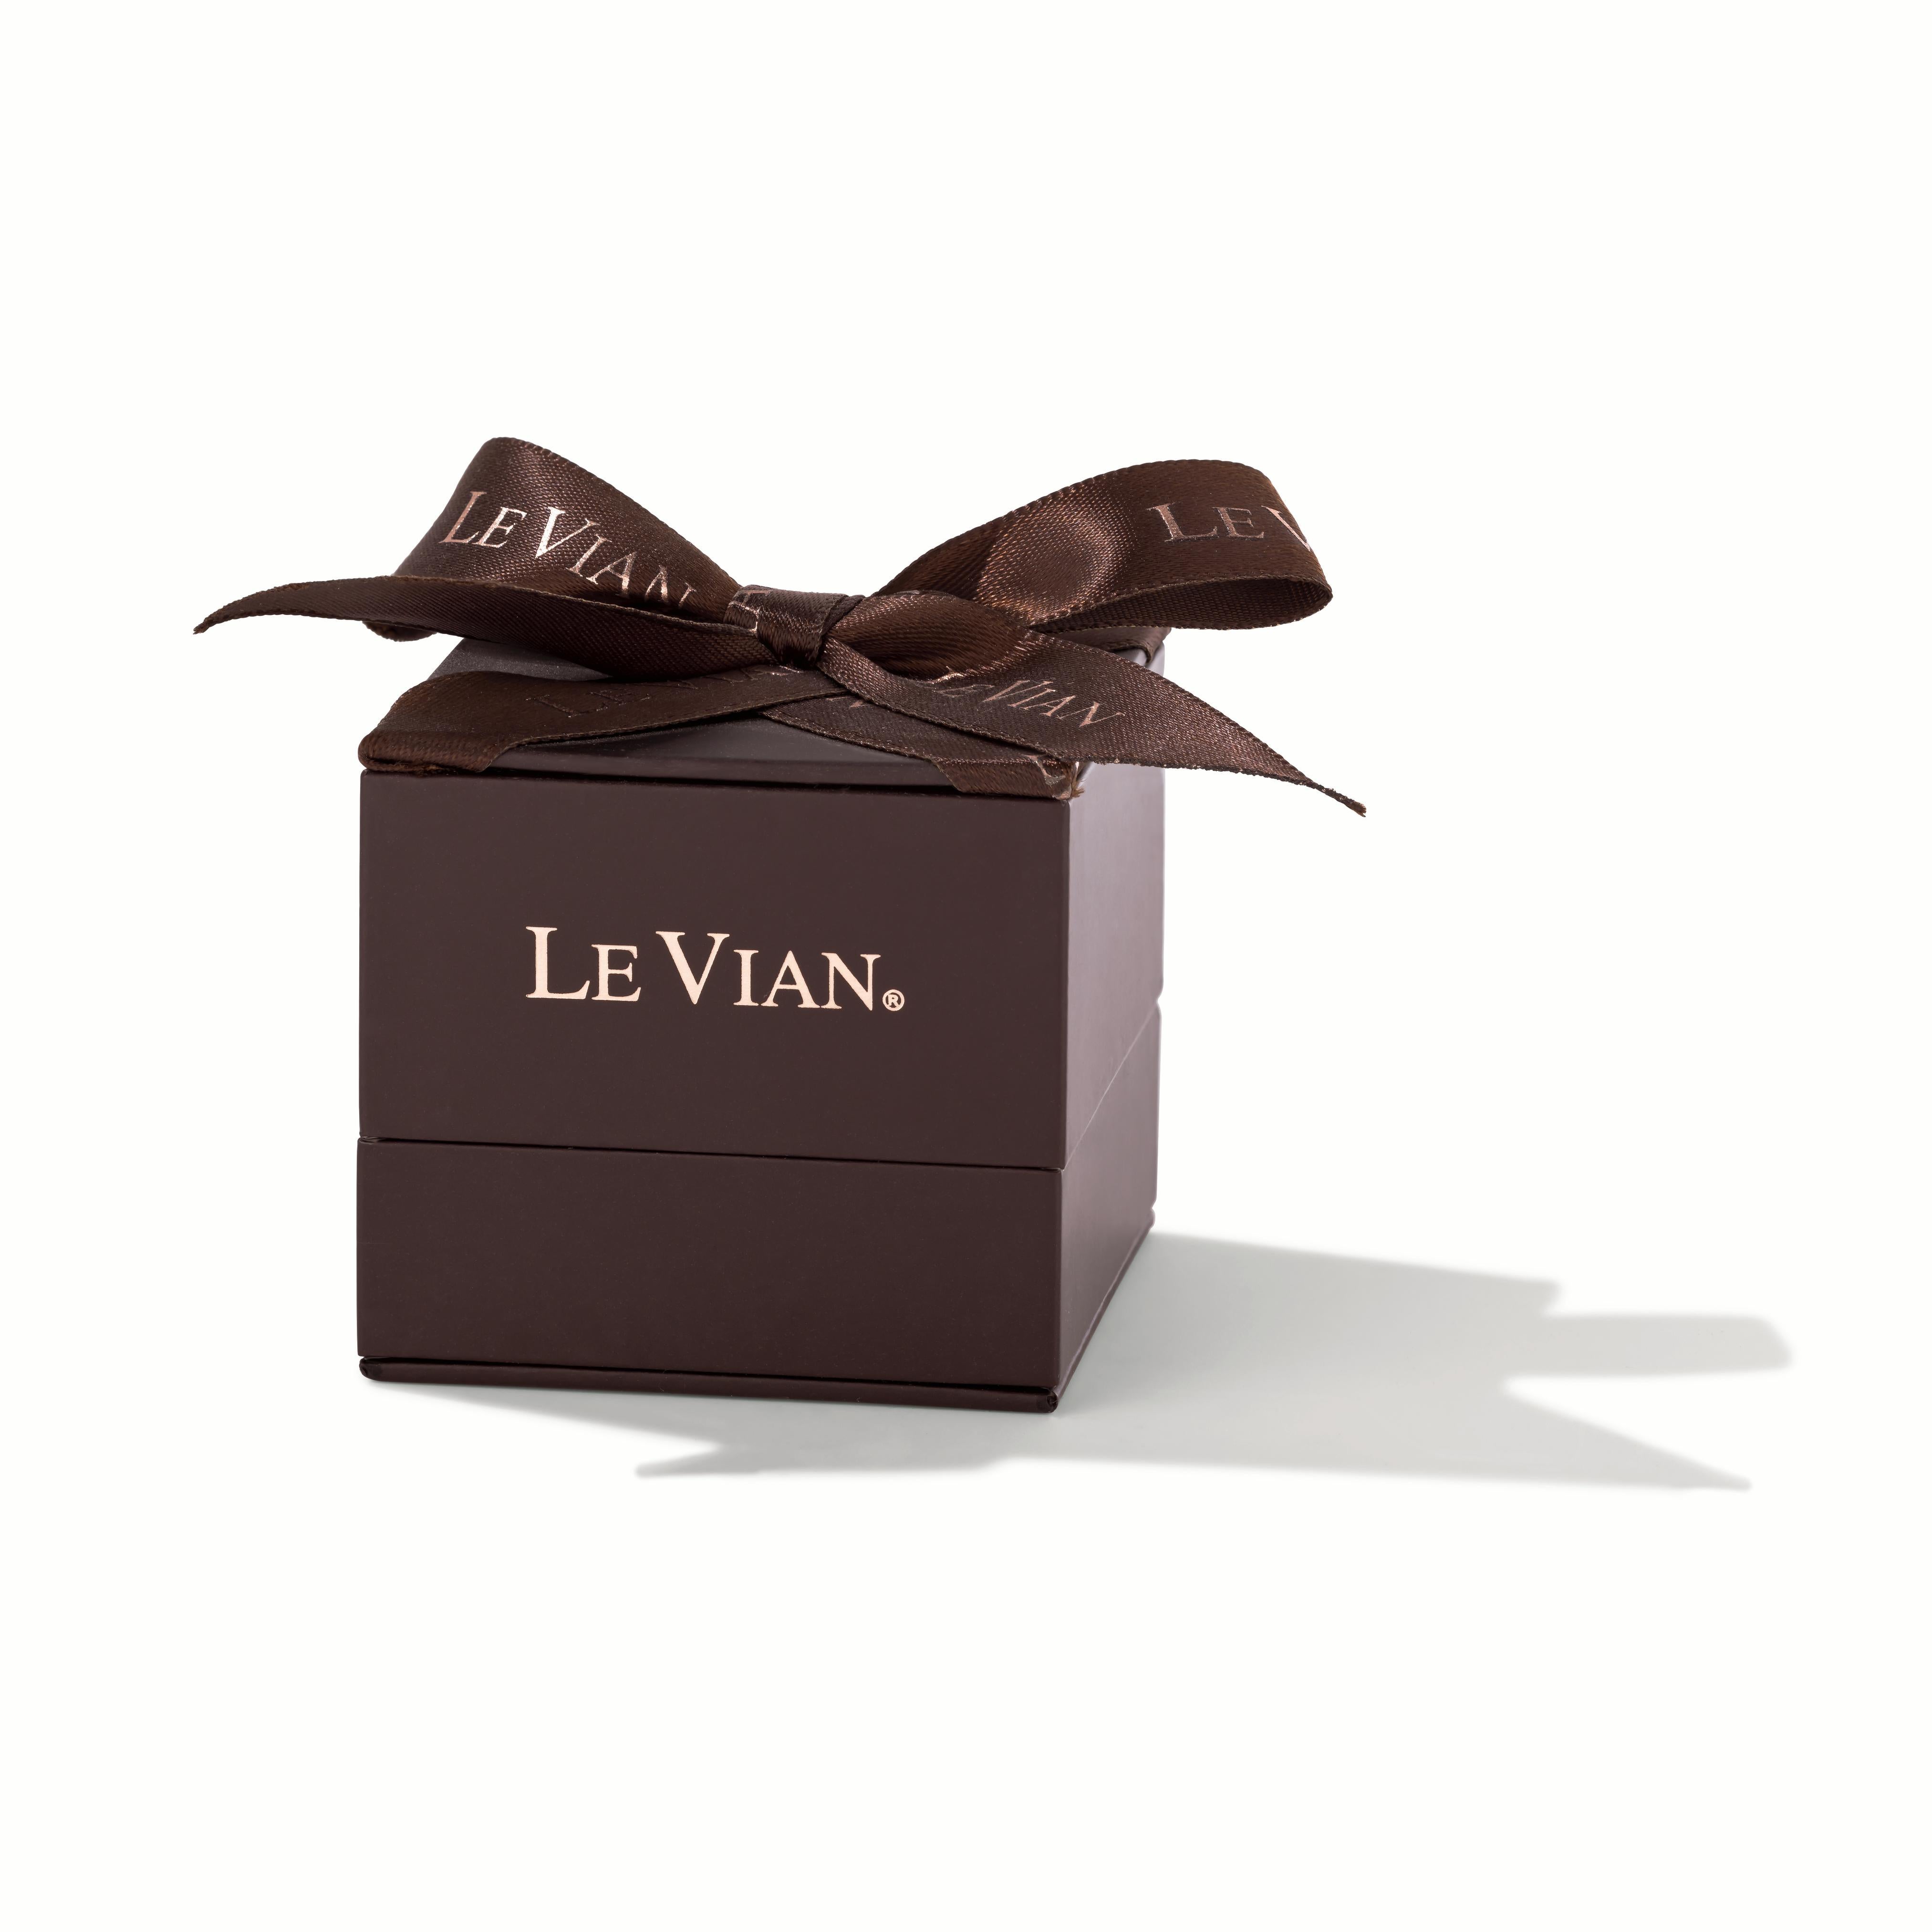 Le Vian® Bird Pin featuring a 2.16 cts Bubblegum Pink Sapphire™ as well as 3.12 cts of Blueberry Sapphire® and 0.17cts of Vanilla Diamonds® and set in 14k Vanilla Gold®

Item comes with a Le Vian® jewelry box as well as a Le Vian® suede pouch!